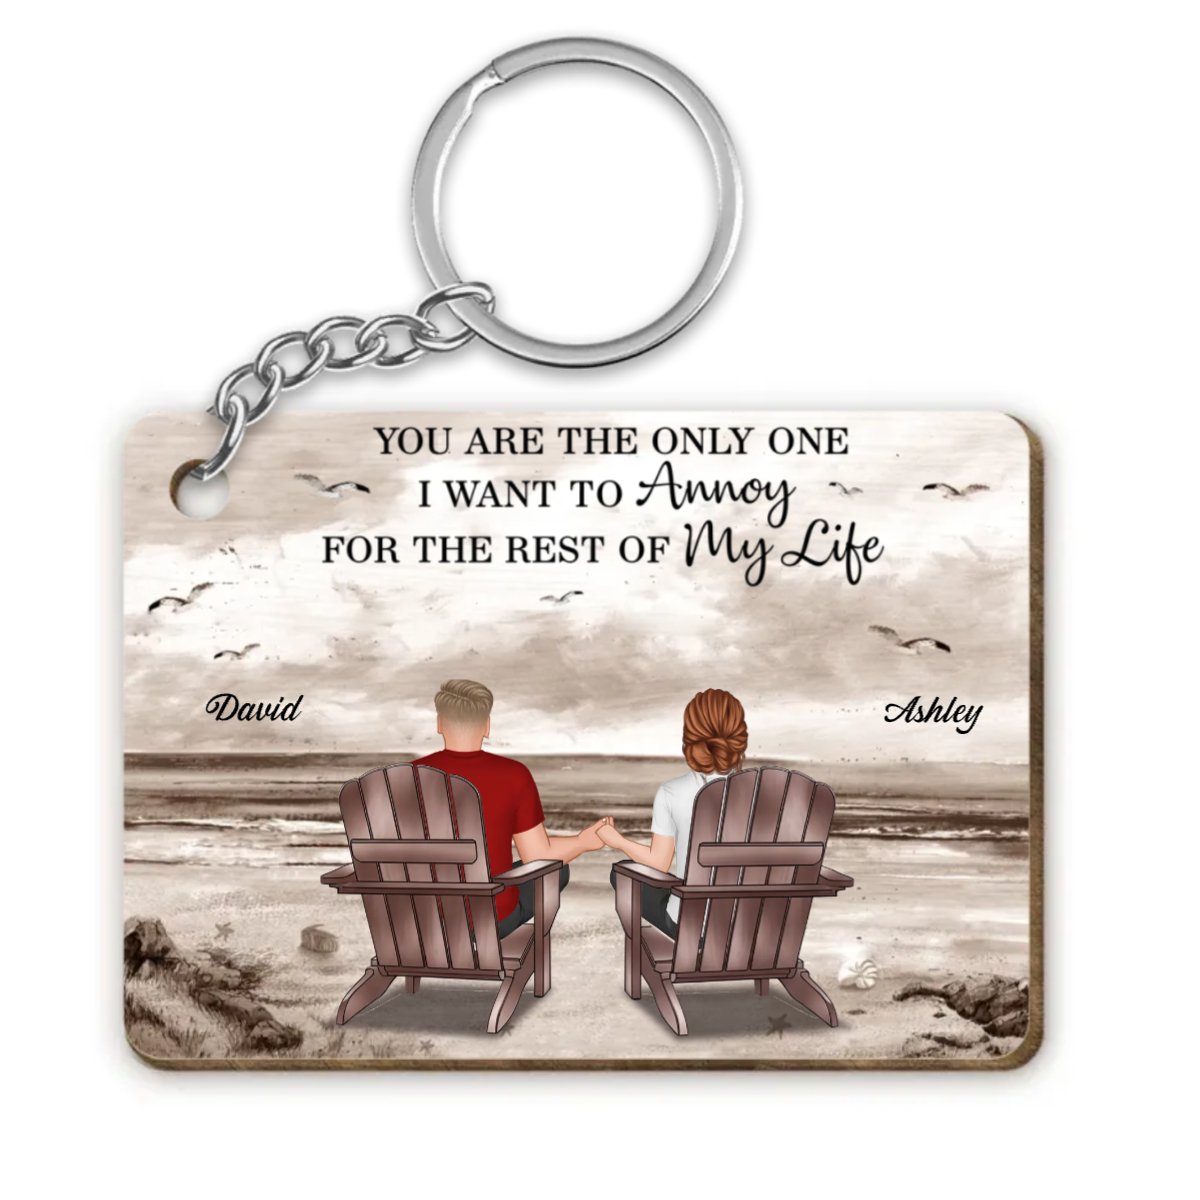 Couple - You Are The Only One I Want To Annoy For The Rest Of My Life - Personalized Wooden Keychain - The Next Custom Gift